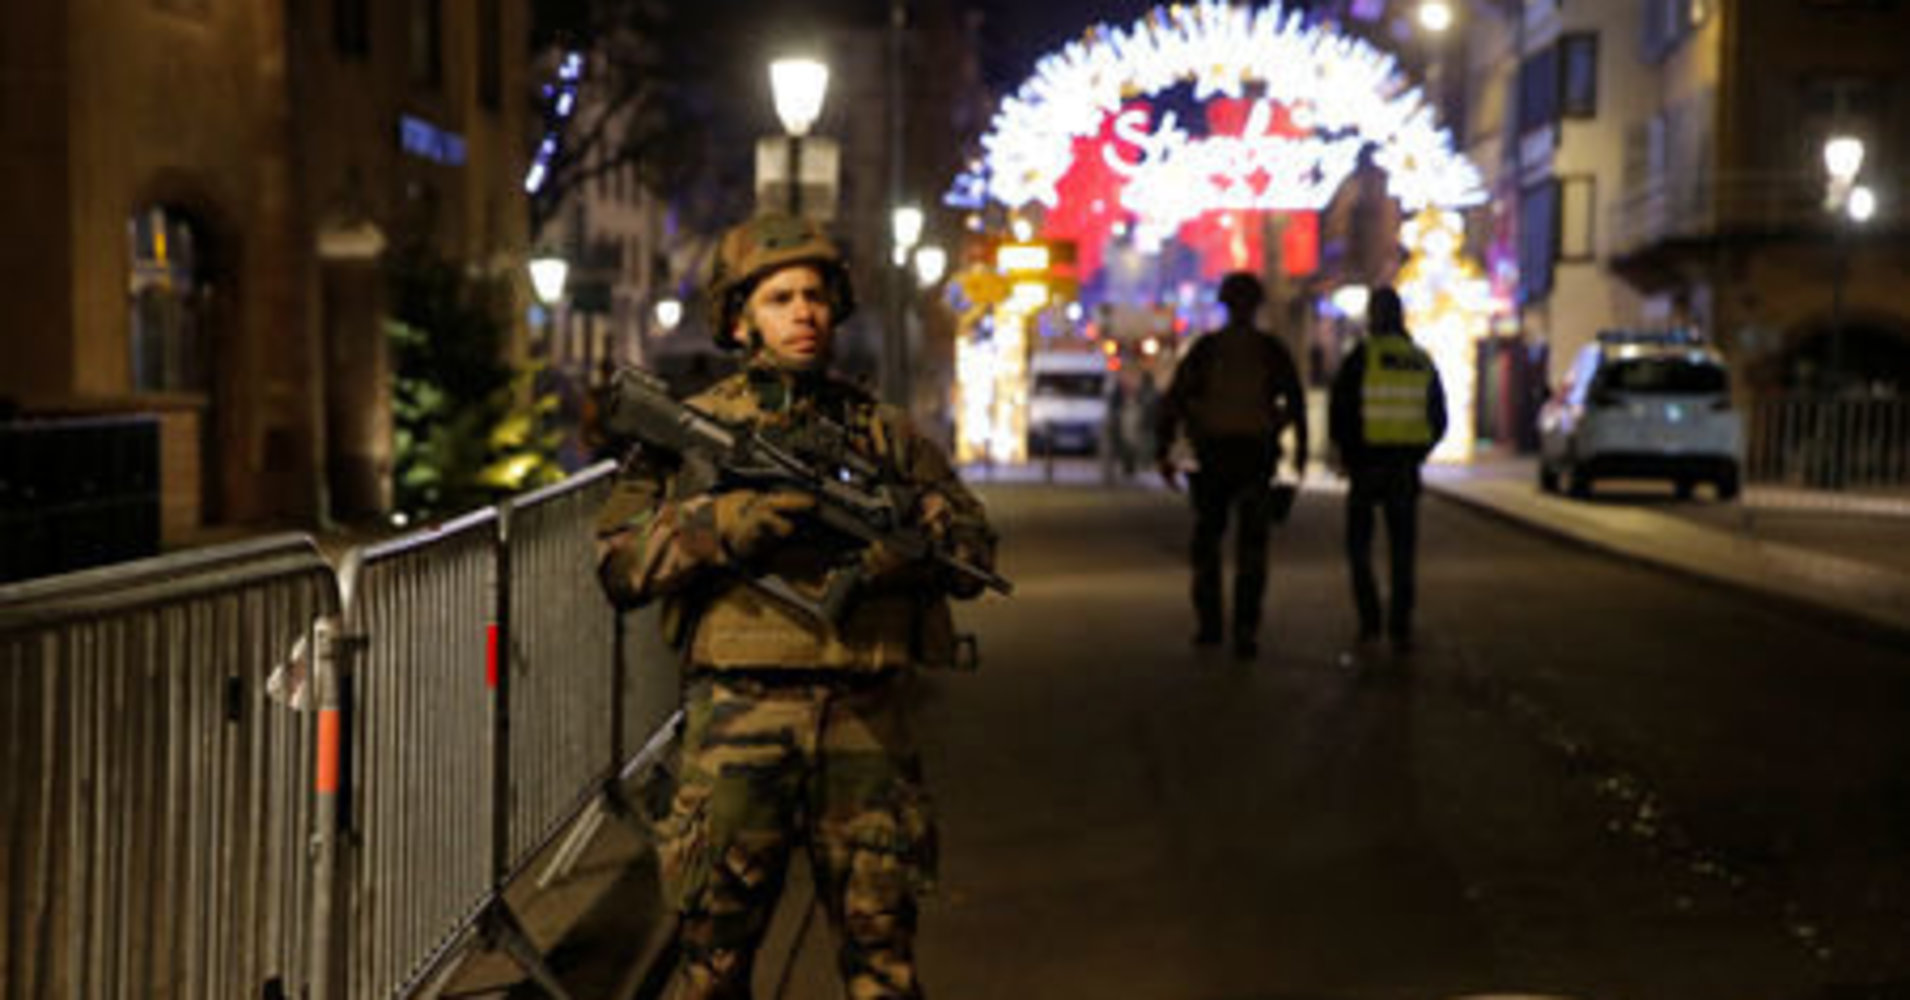  Strasbourg Shooting: At Least 2 Dead, Several Injured And In Critical Condition